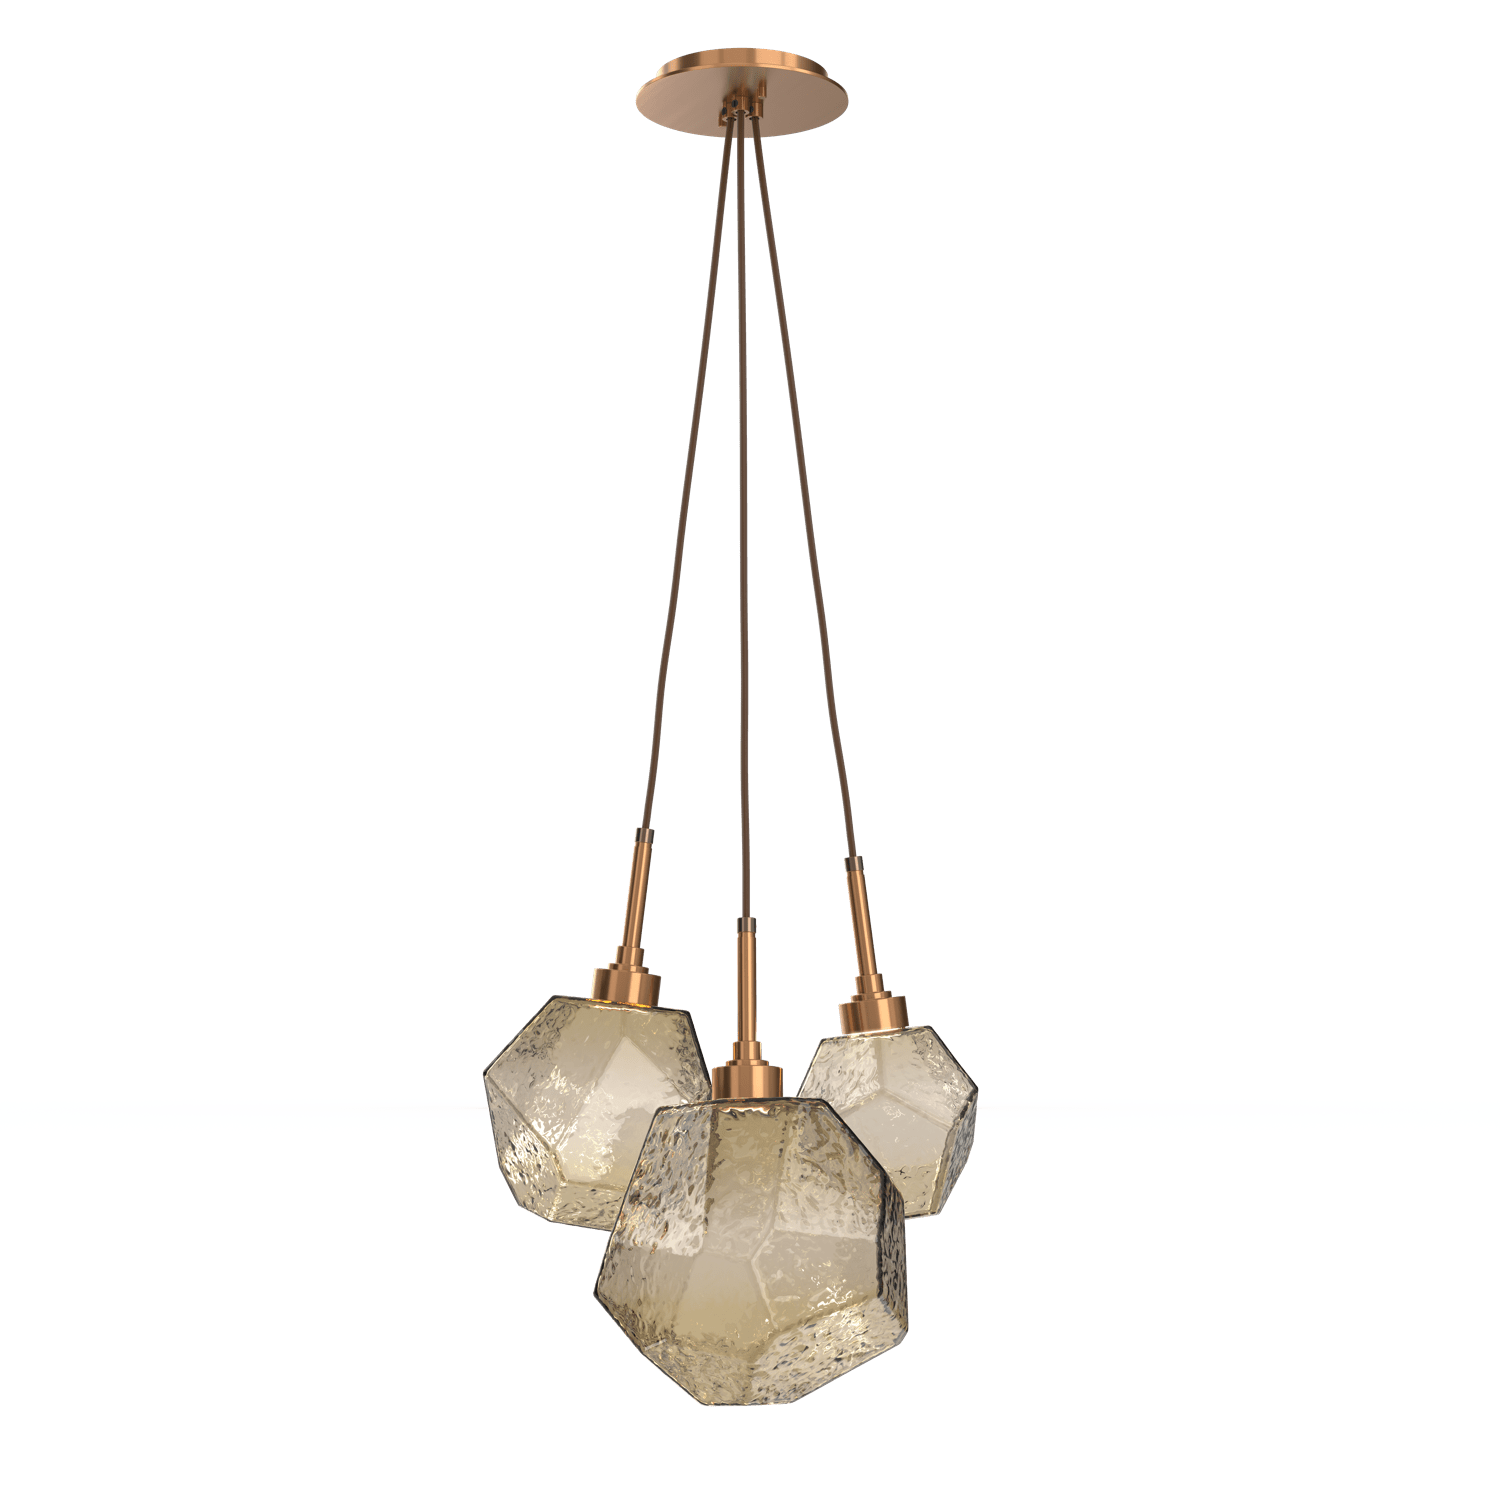 CHB0039-0E-RB-B-Hammerton-Studio-Gem-3-light-cluster-pendant-light-with-oil-rubbed-bronze-finish-and-bronze-blown-glass-shades-and-LED-lamping